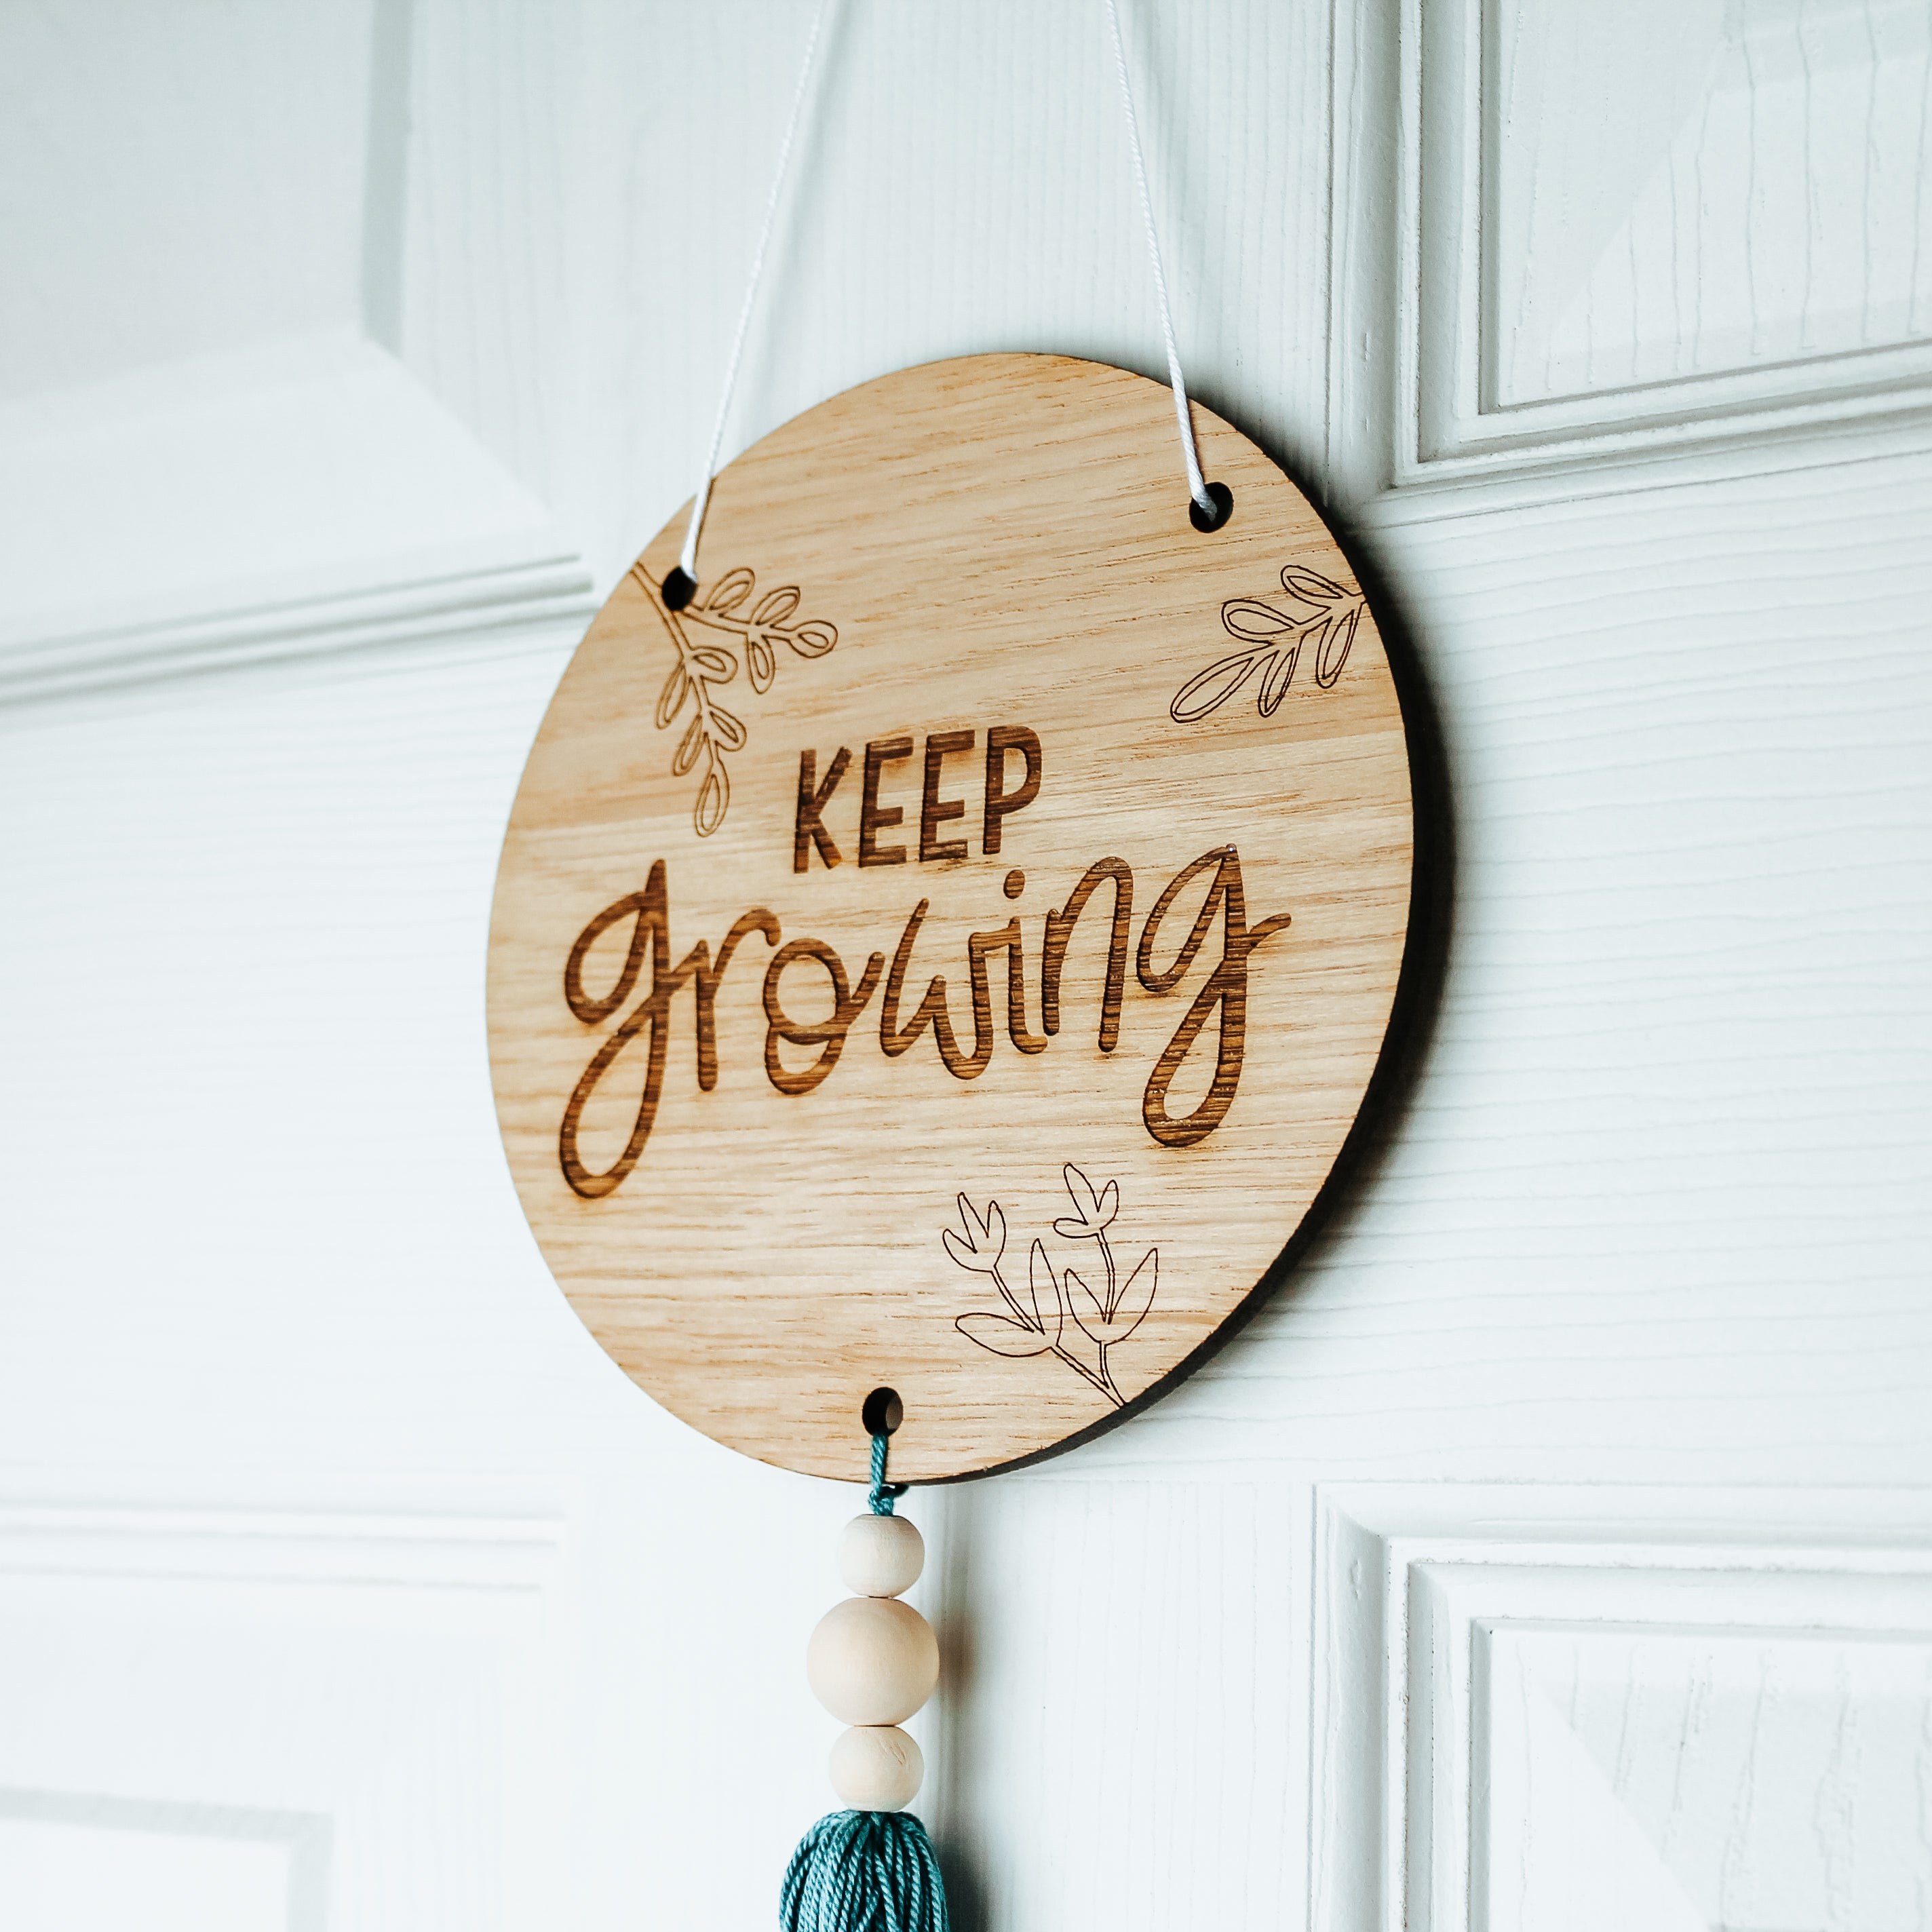 motivational wooden round sign for the plant lover. engraved with the phrase keep growing and botanical designs on it